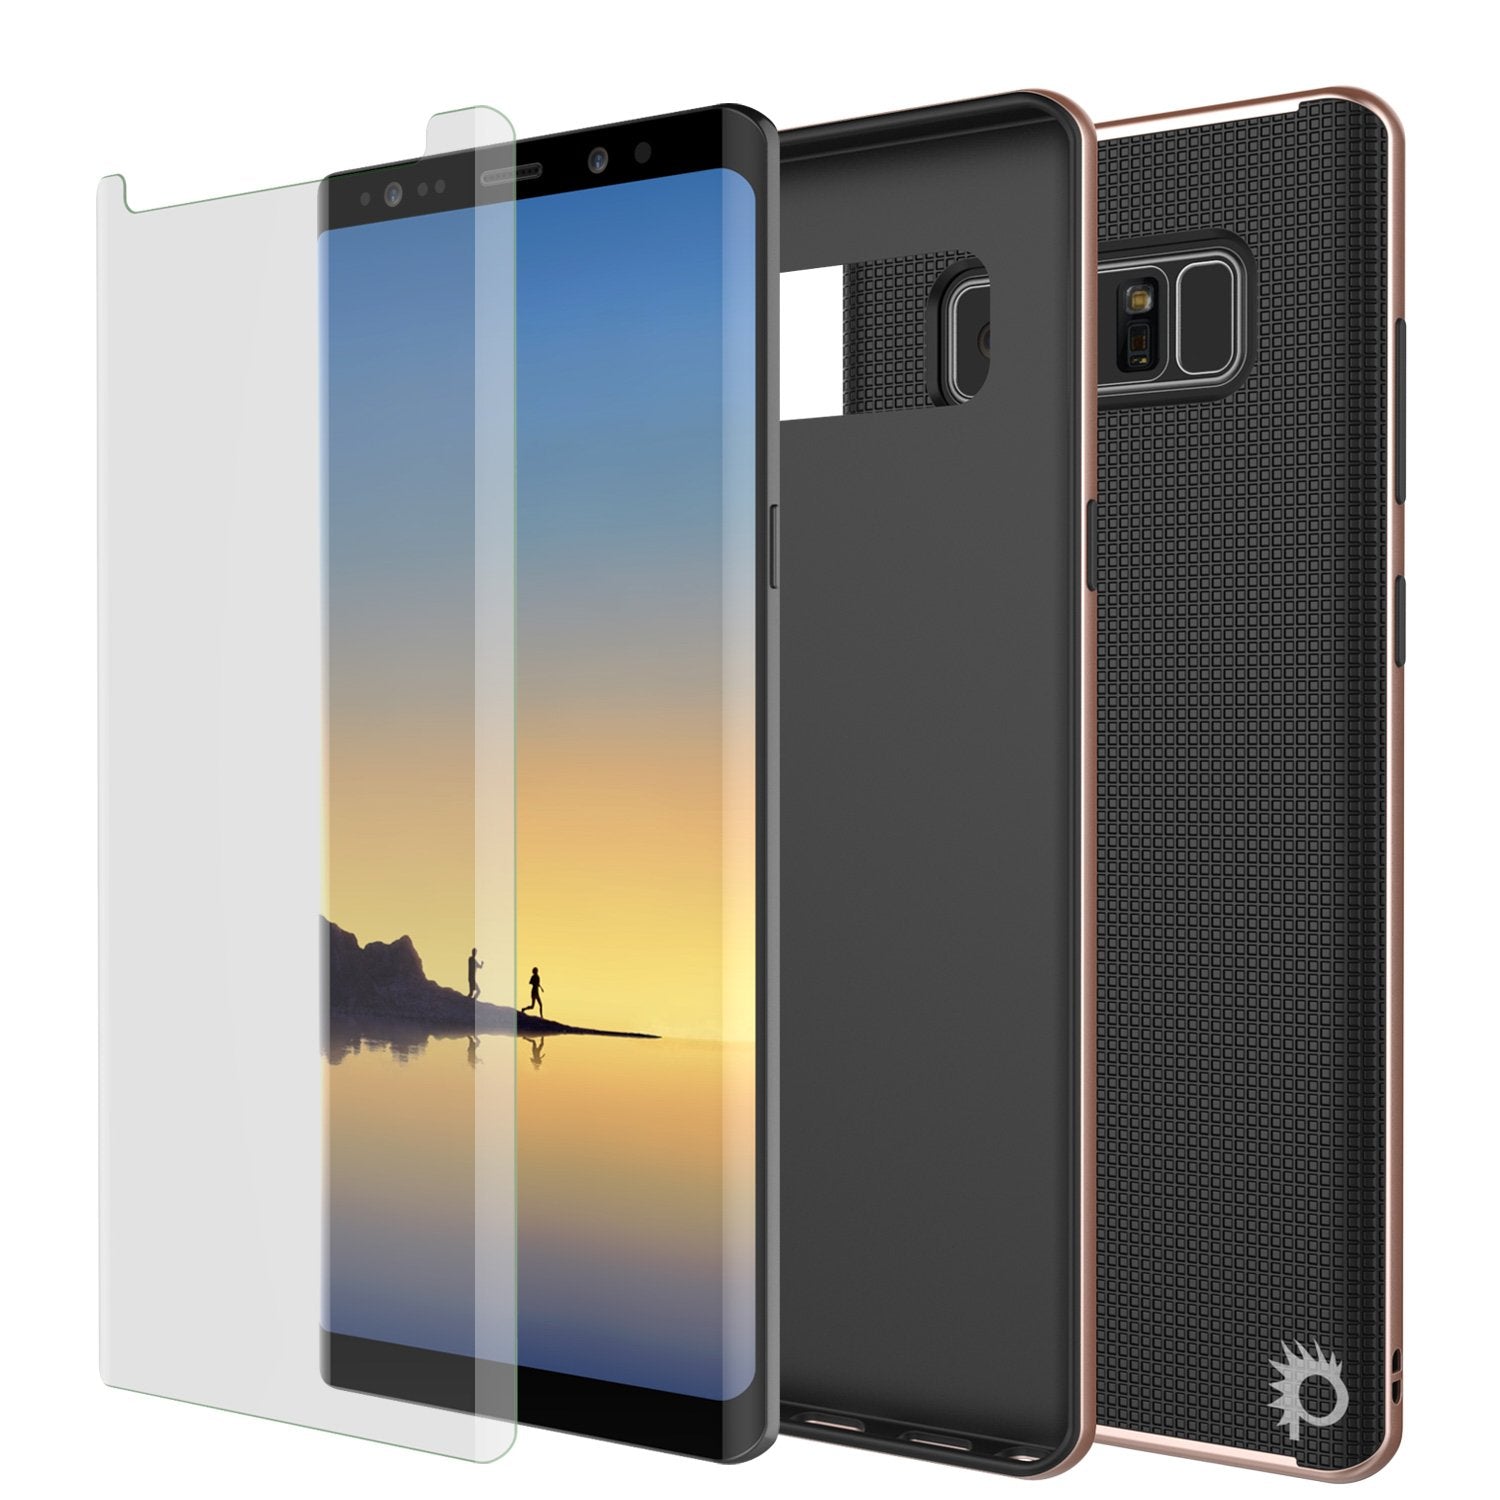 Galaxy Note 8 Case, PunkCase [Stealth Series] Hybrid 3-Piece Shockproof Dual Layer Cover [Non-Slip] [Soft TPU + PC Bumper] with PUNKSHIELD Screen Protector for Samsung Note 8 [Rose Gold] - PunkCase NZ